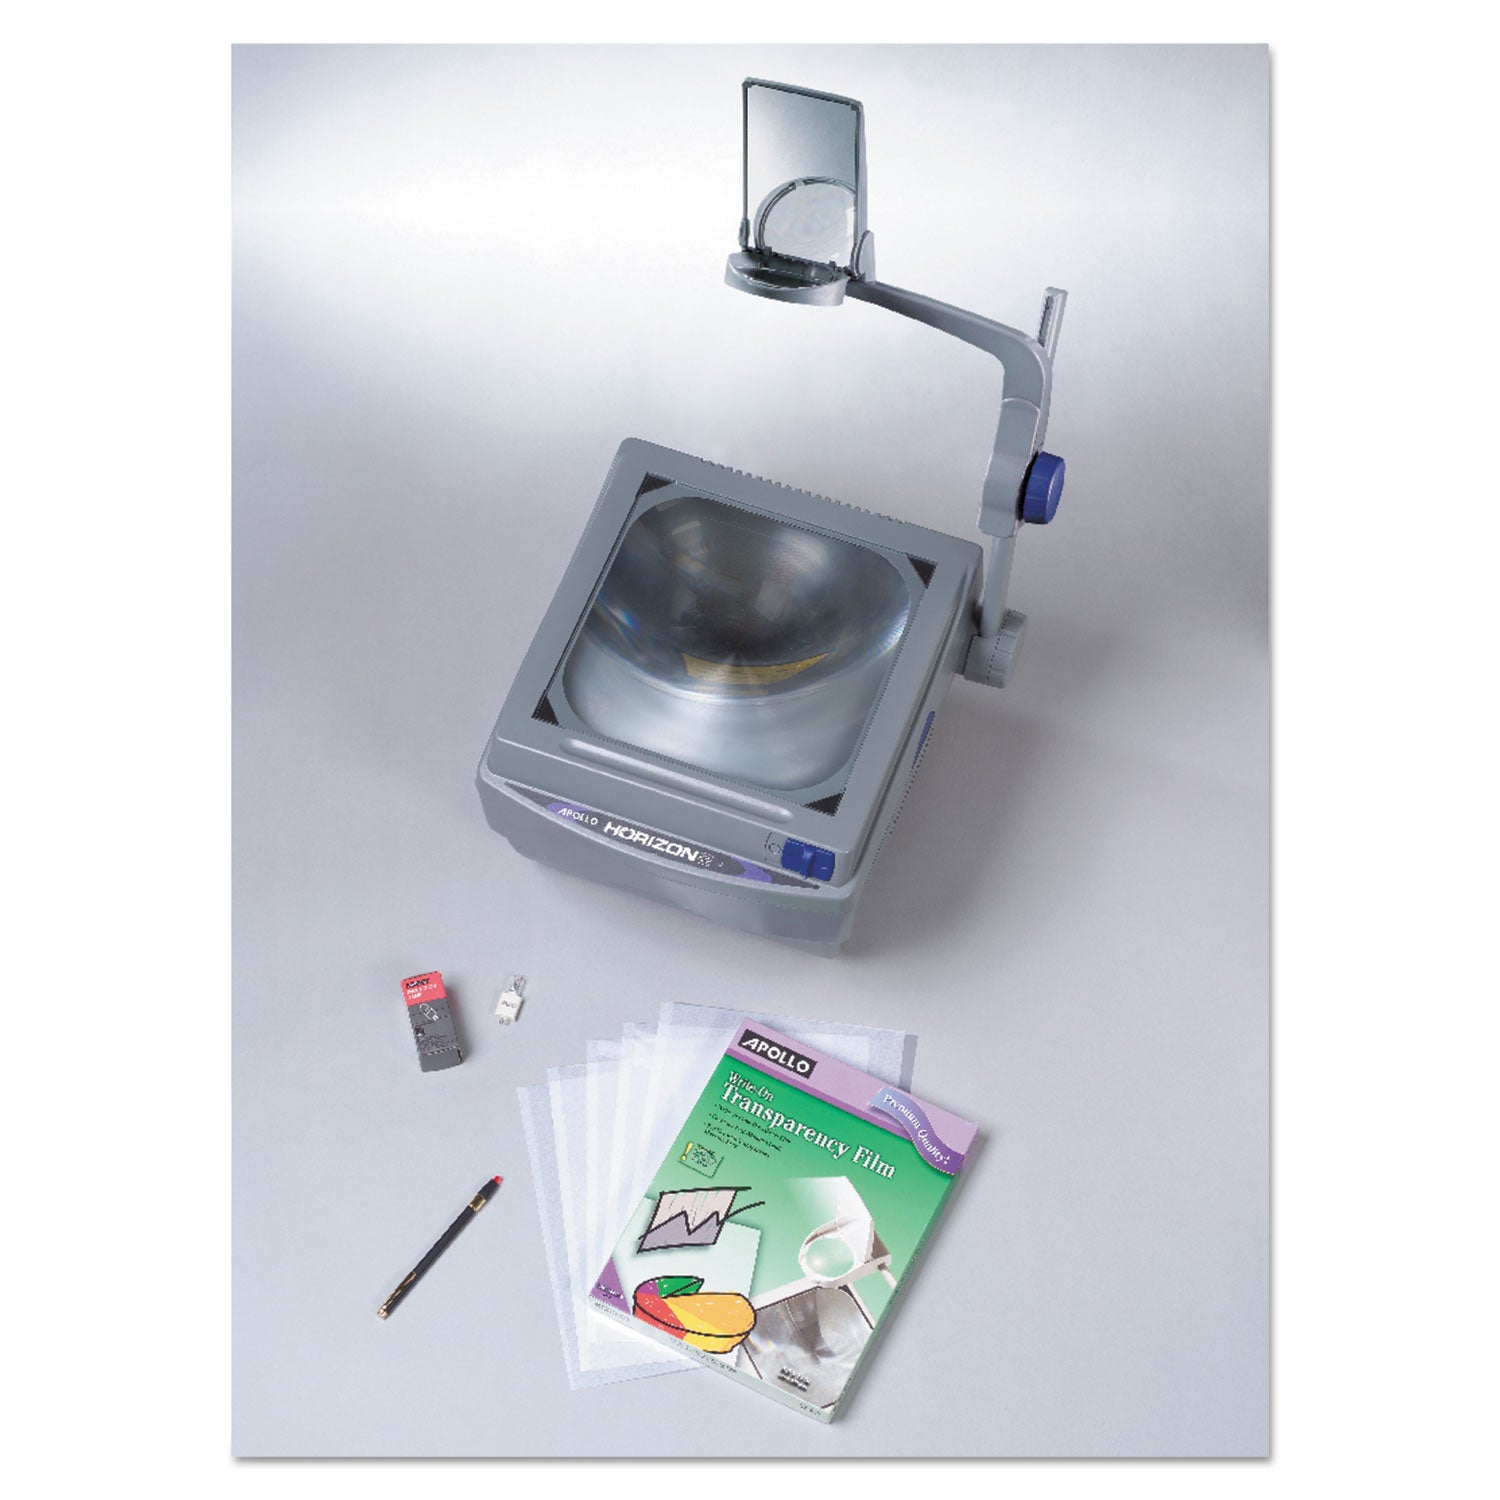 Model 16000 Overhead Projector, 2,000 lm, 14.5 x 15 x 27 - 